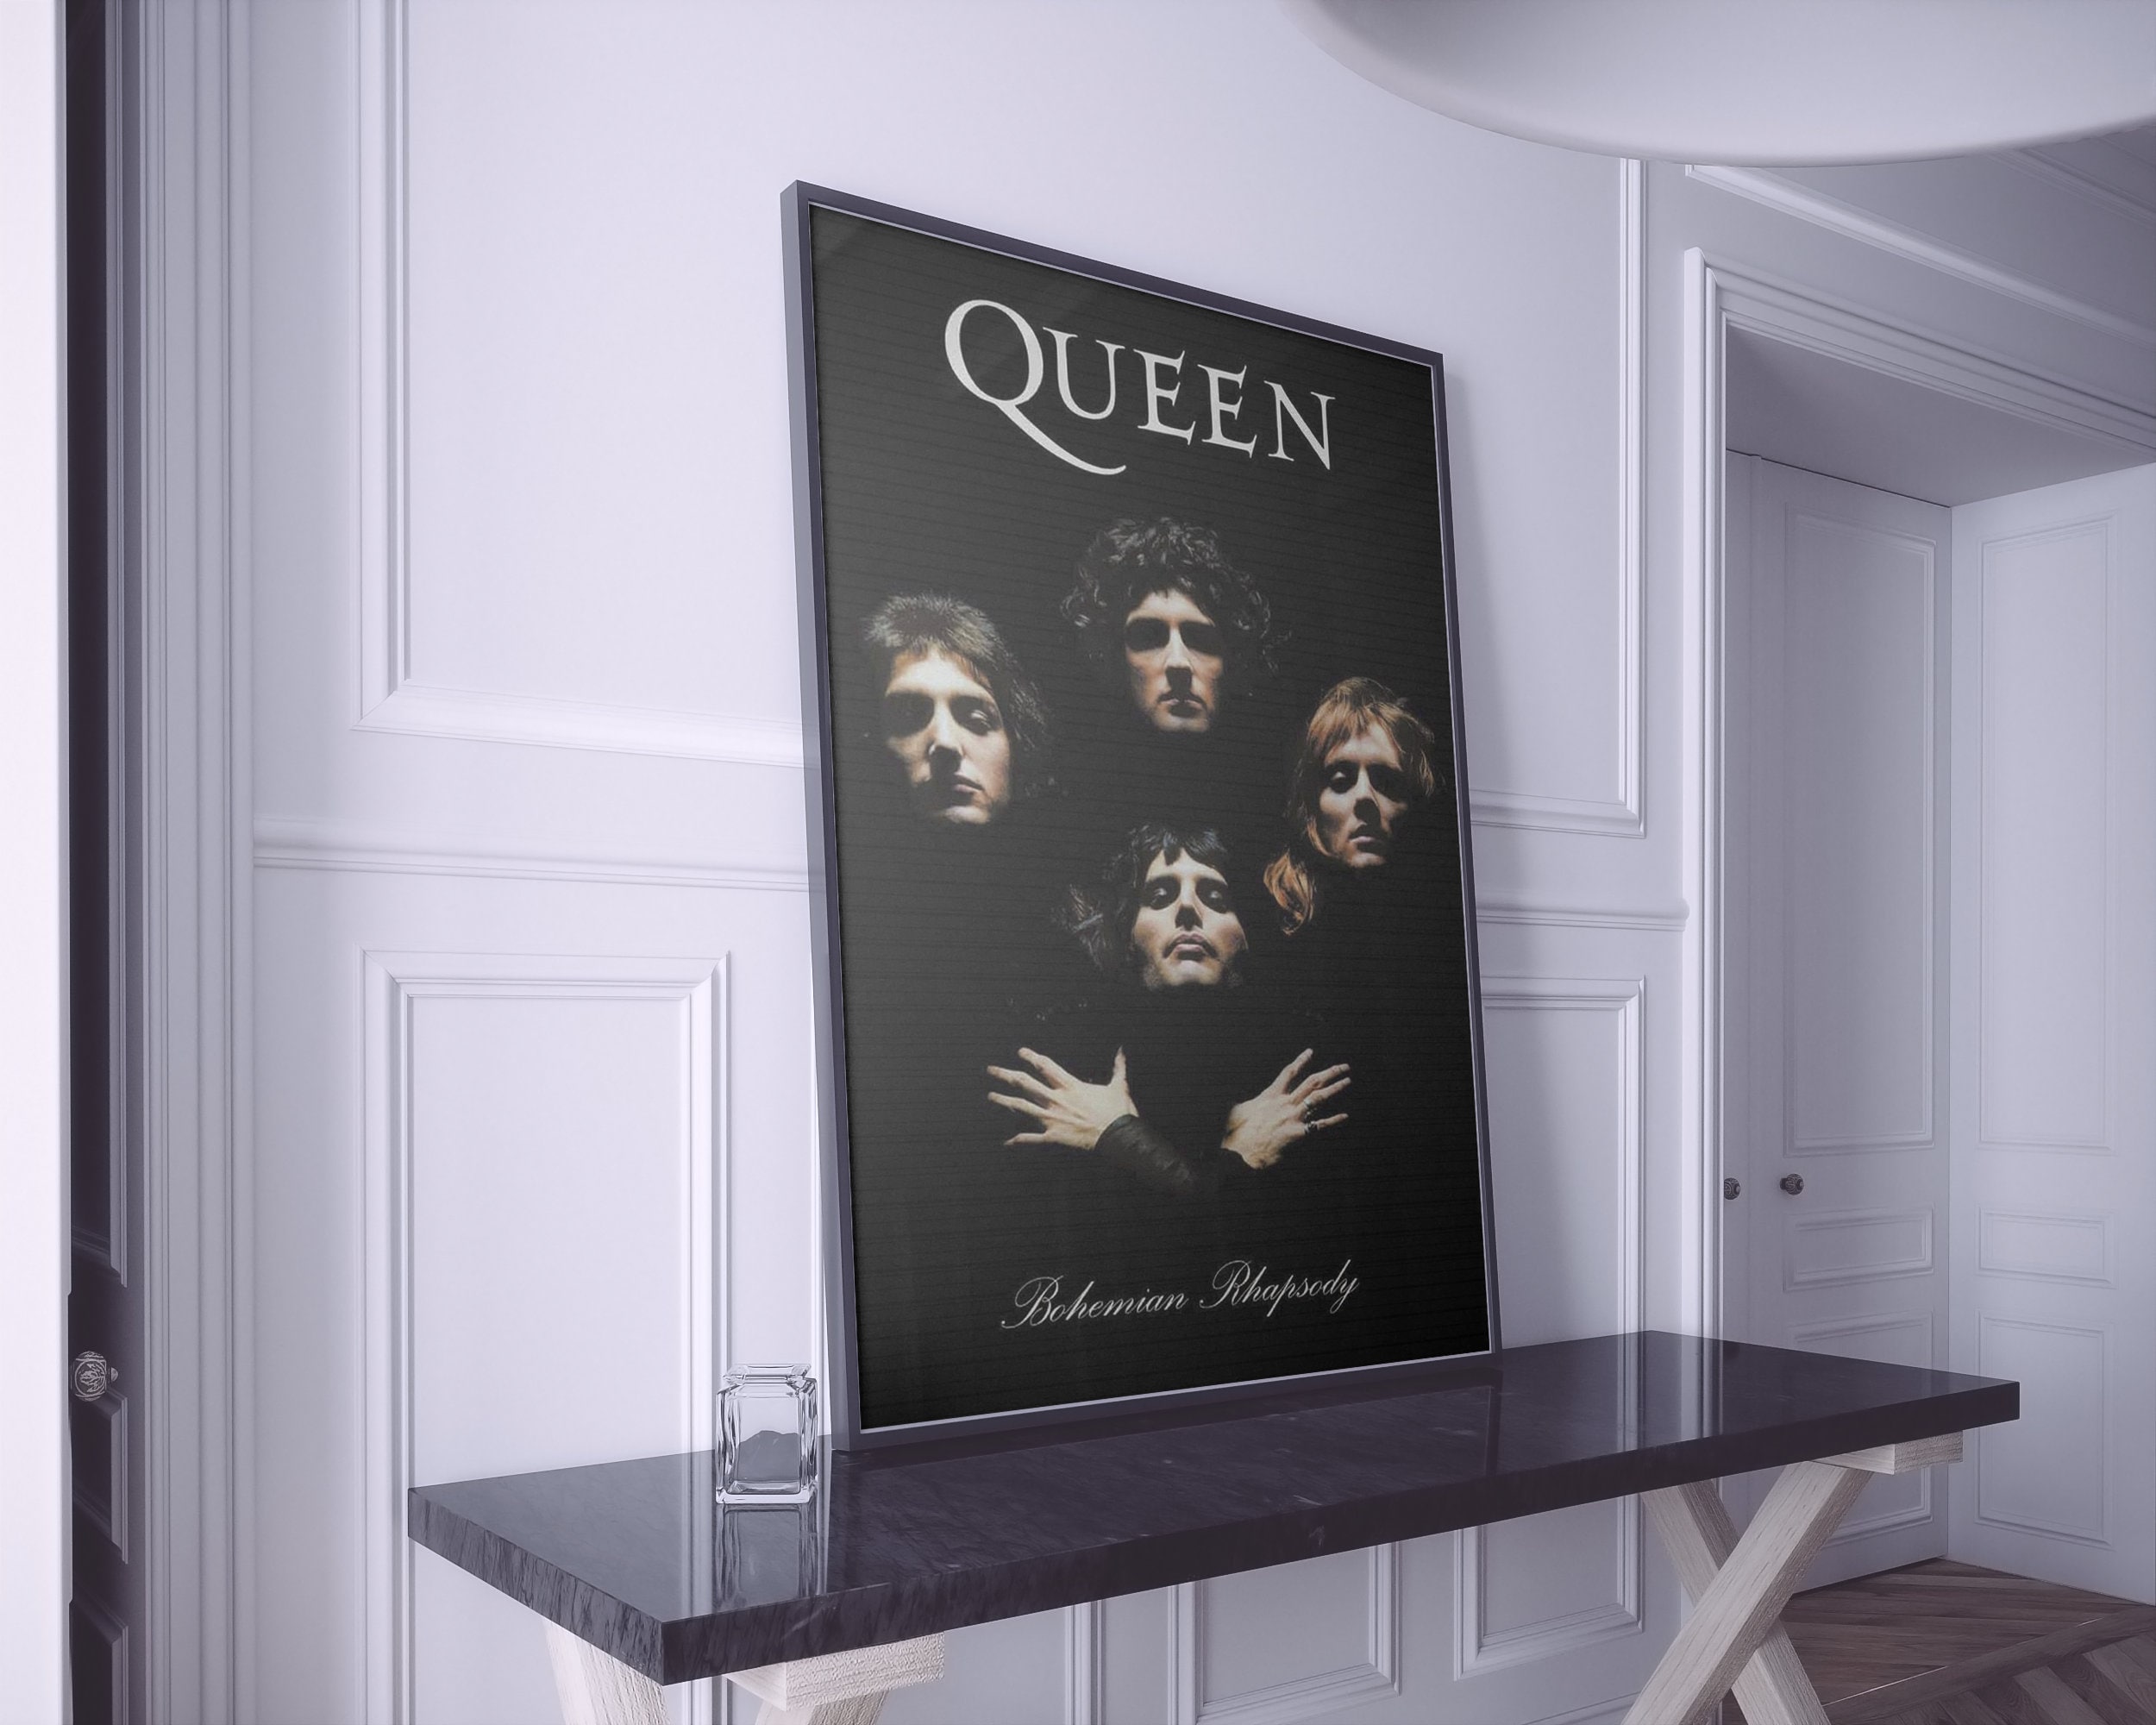 Queen Poster / Metal Band Poster / Vintage poster / Retro Poster